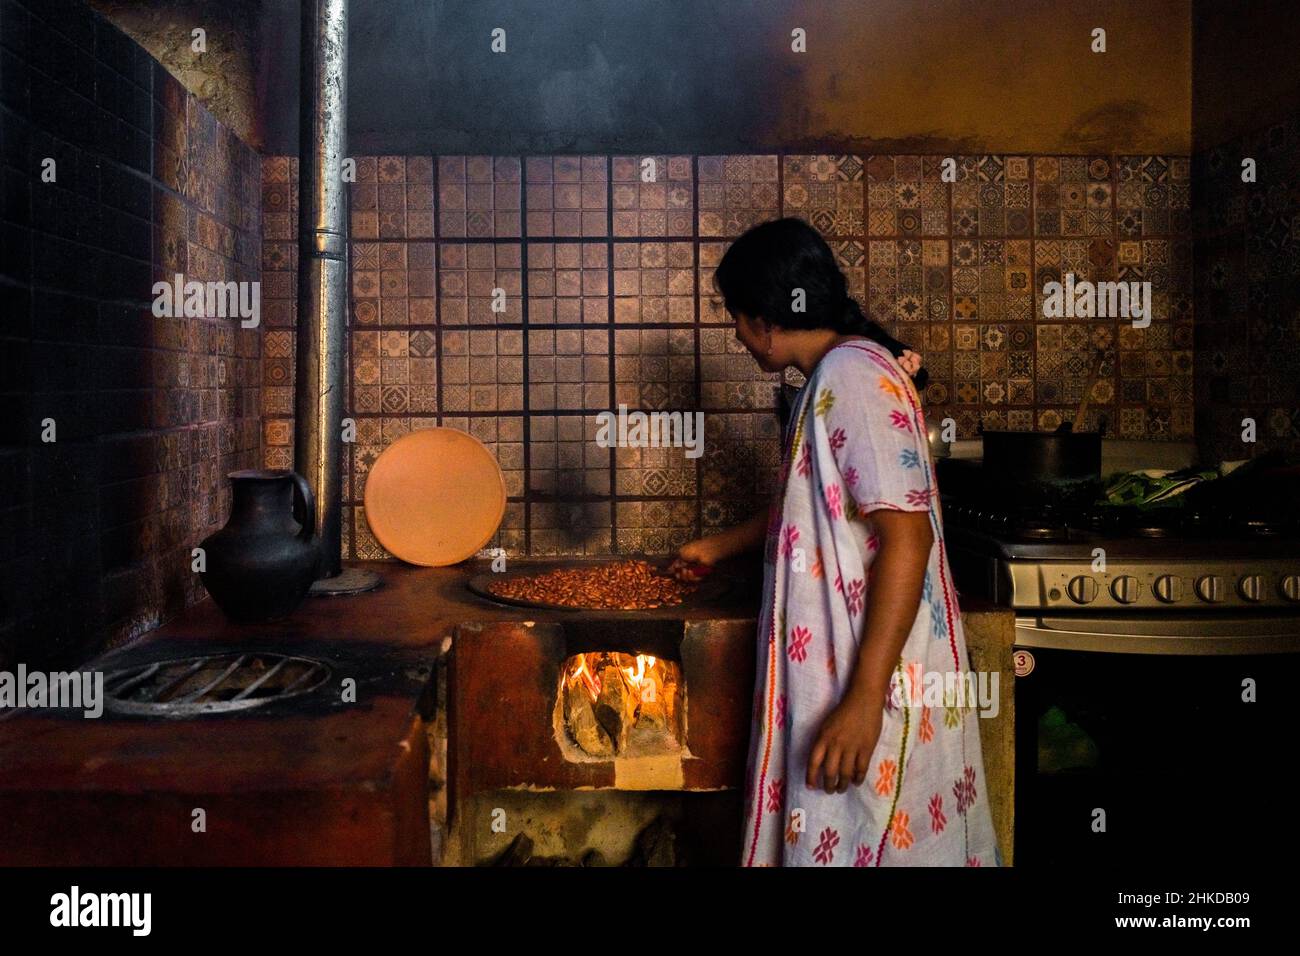 An Amuzgo indigenous woman roasts cacao beans on a clay plate over fire in artisanal chocolate manufacture in Xochistlahuaca, Mexico. Stock Photo